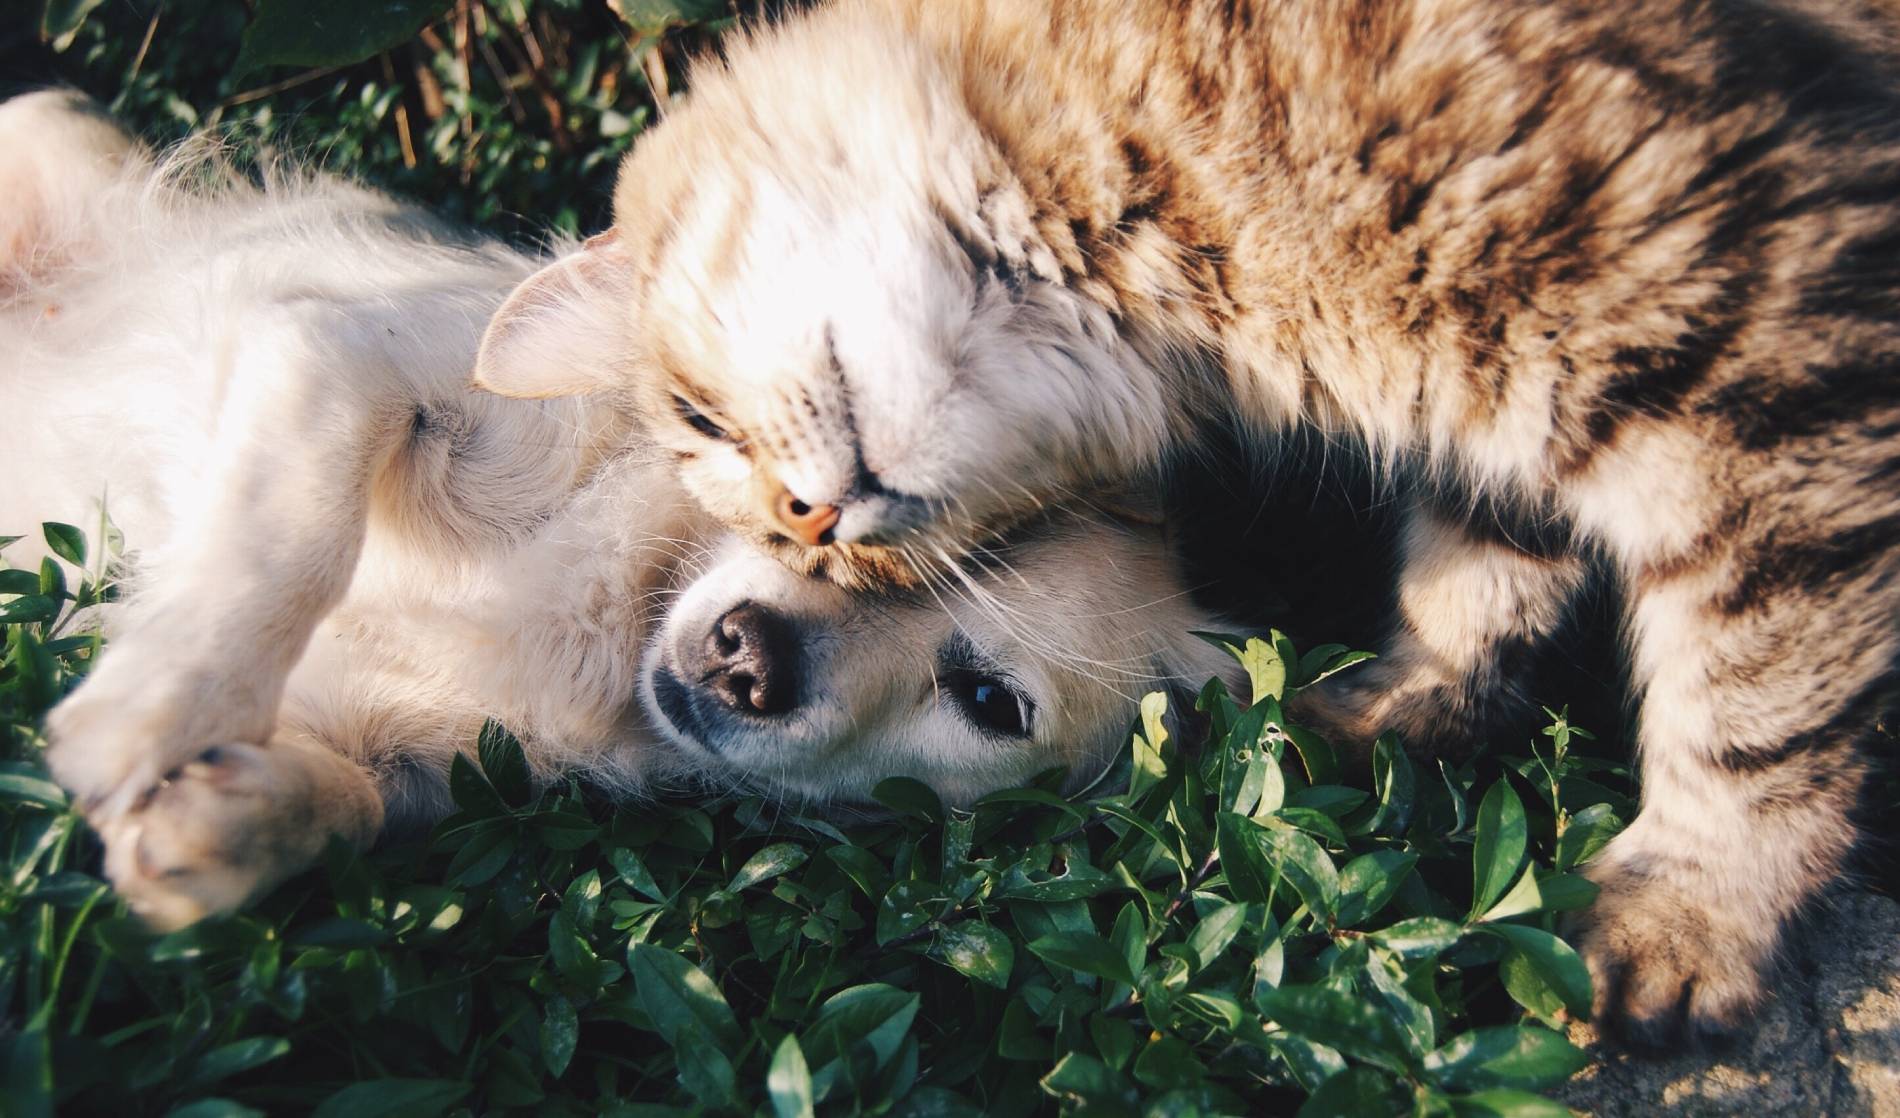 A cat and dog laying in the grass.